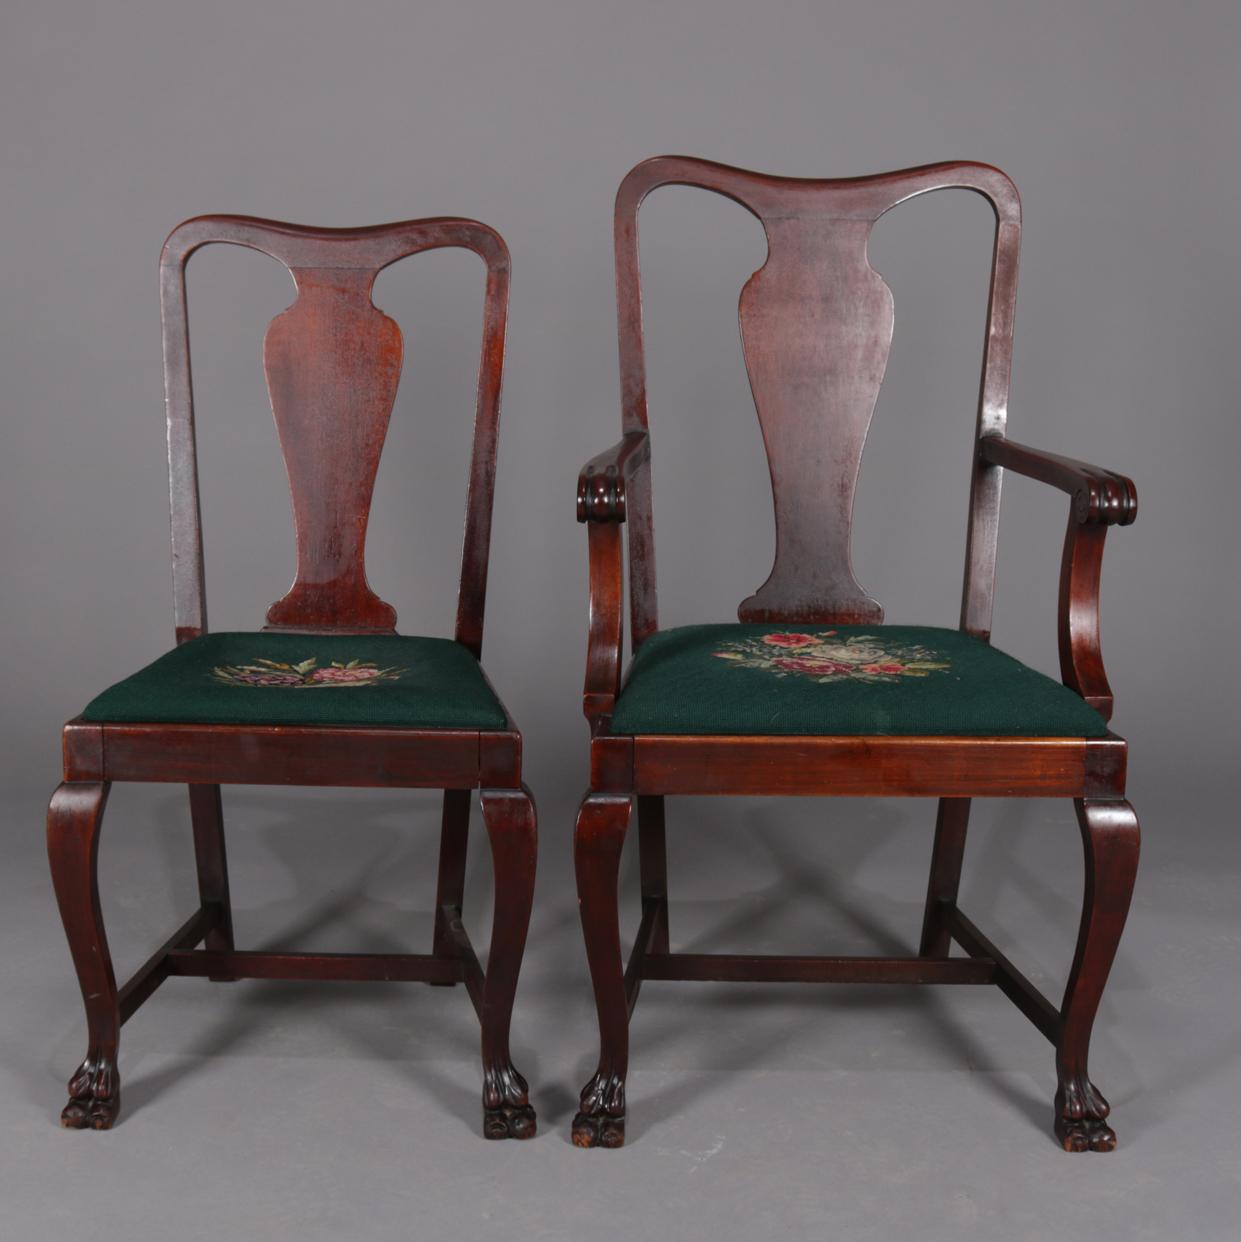 Set of 6 Chippendale style dining chairs feature mahogany frames with shaped plank splat backs, paw feet and floral needlepoint upholstered seats, set includes one armchair and five side chairs, circa 1920.

Measures: side chairs 38.5